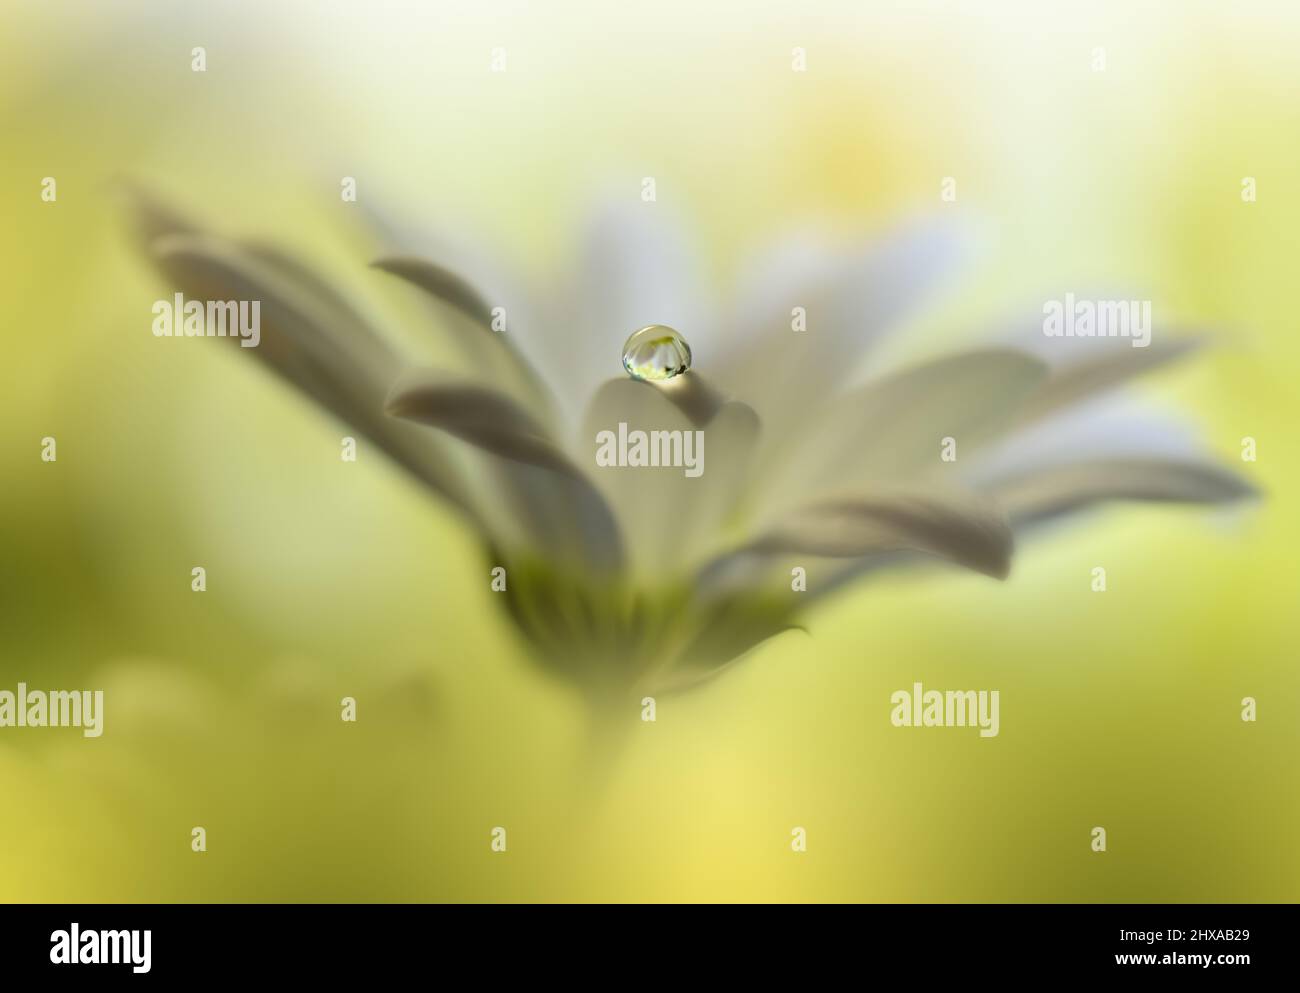 Beautiful Macro Photo.Colorful Flowers.Art Design.Magic Light.Close up Photography.Conceptual Abstract Image.Yellow and Green Background.Water Drop. Stock Photo